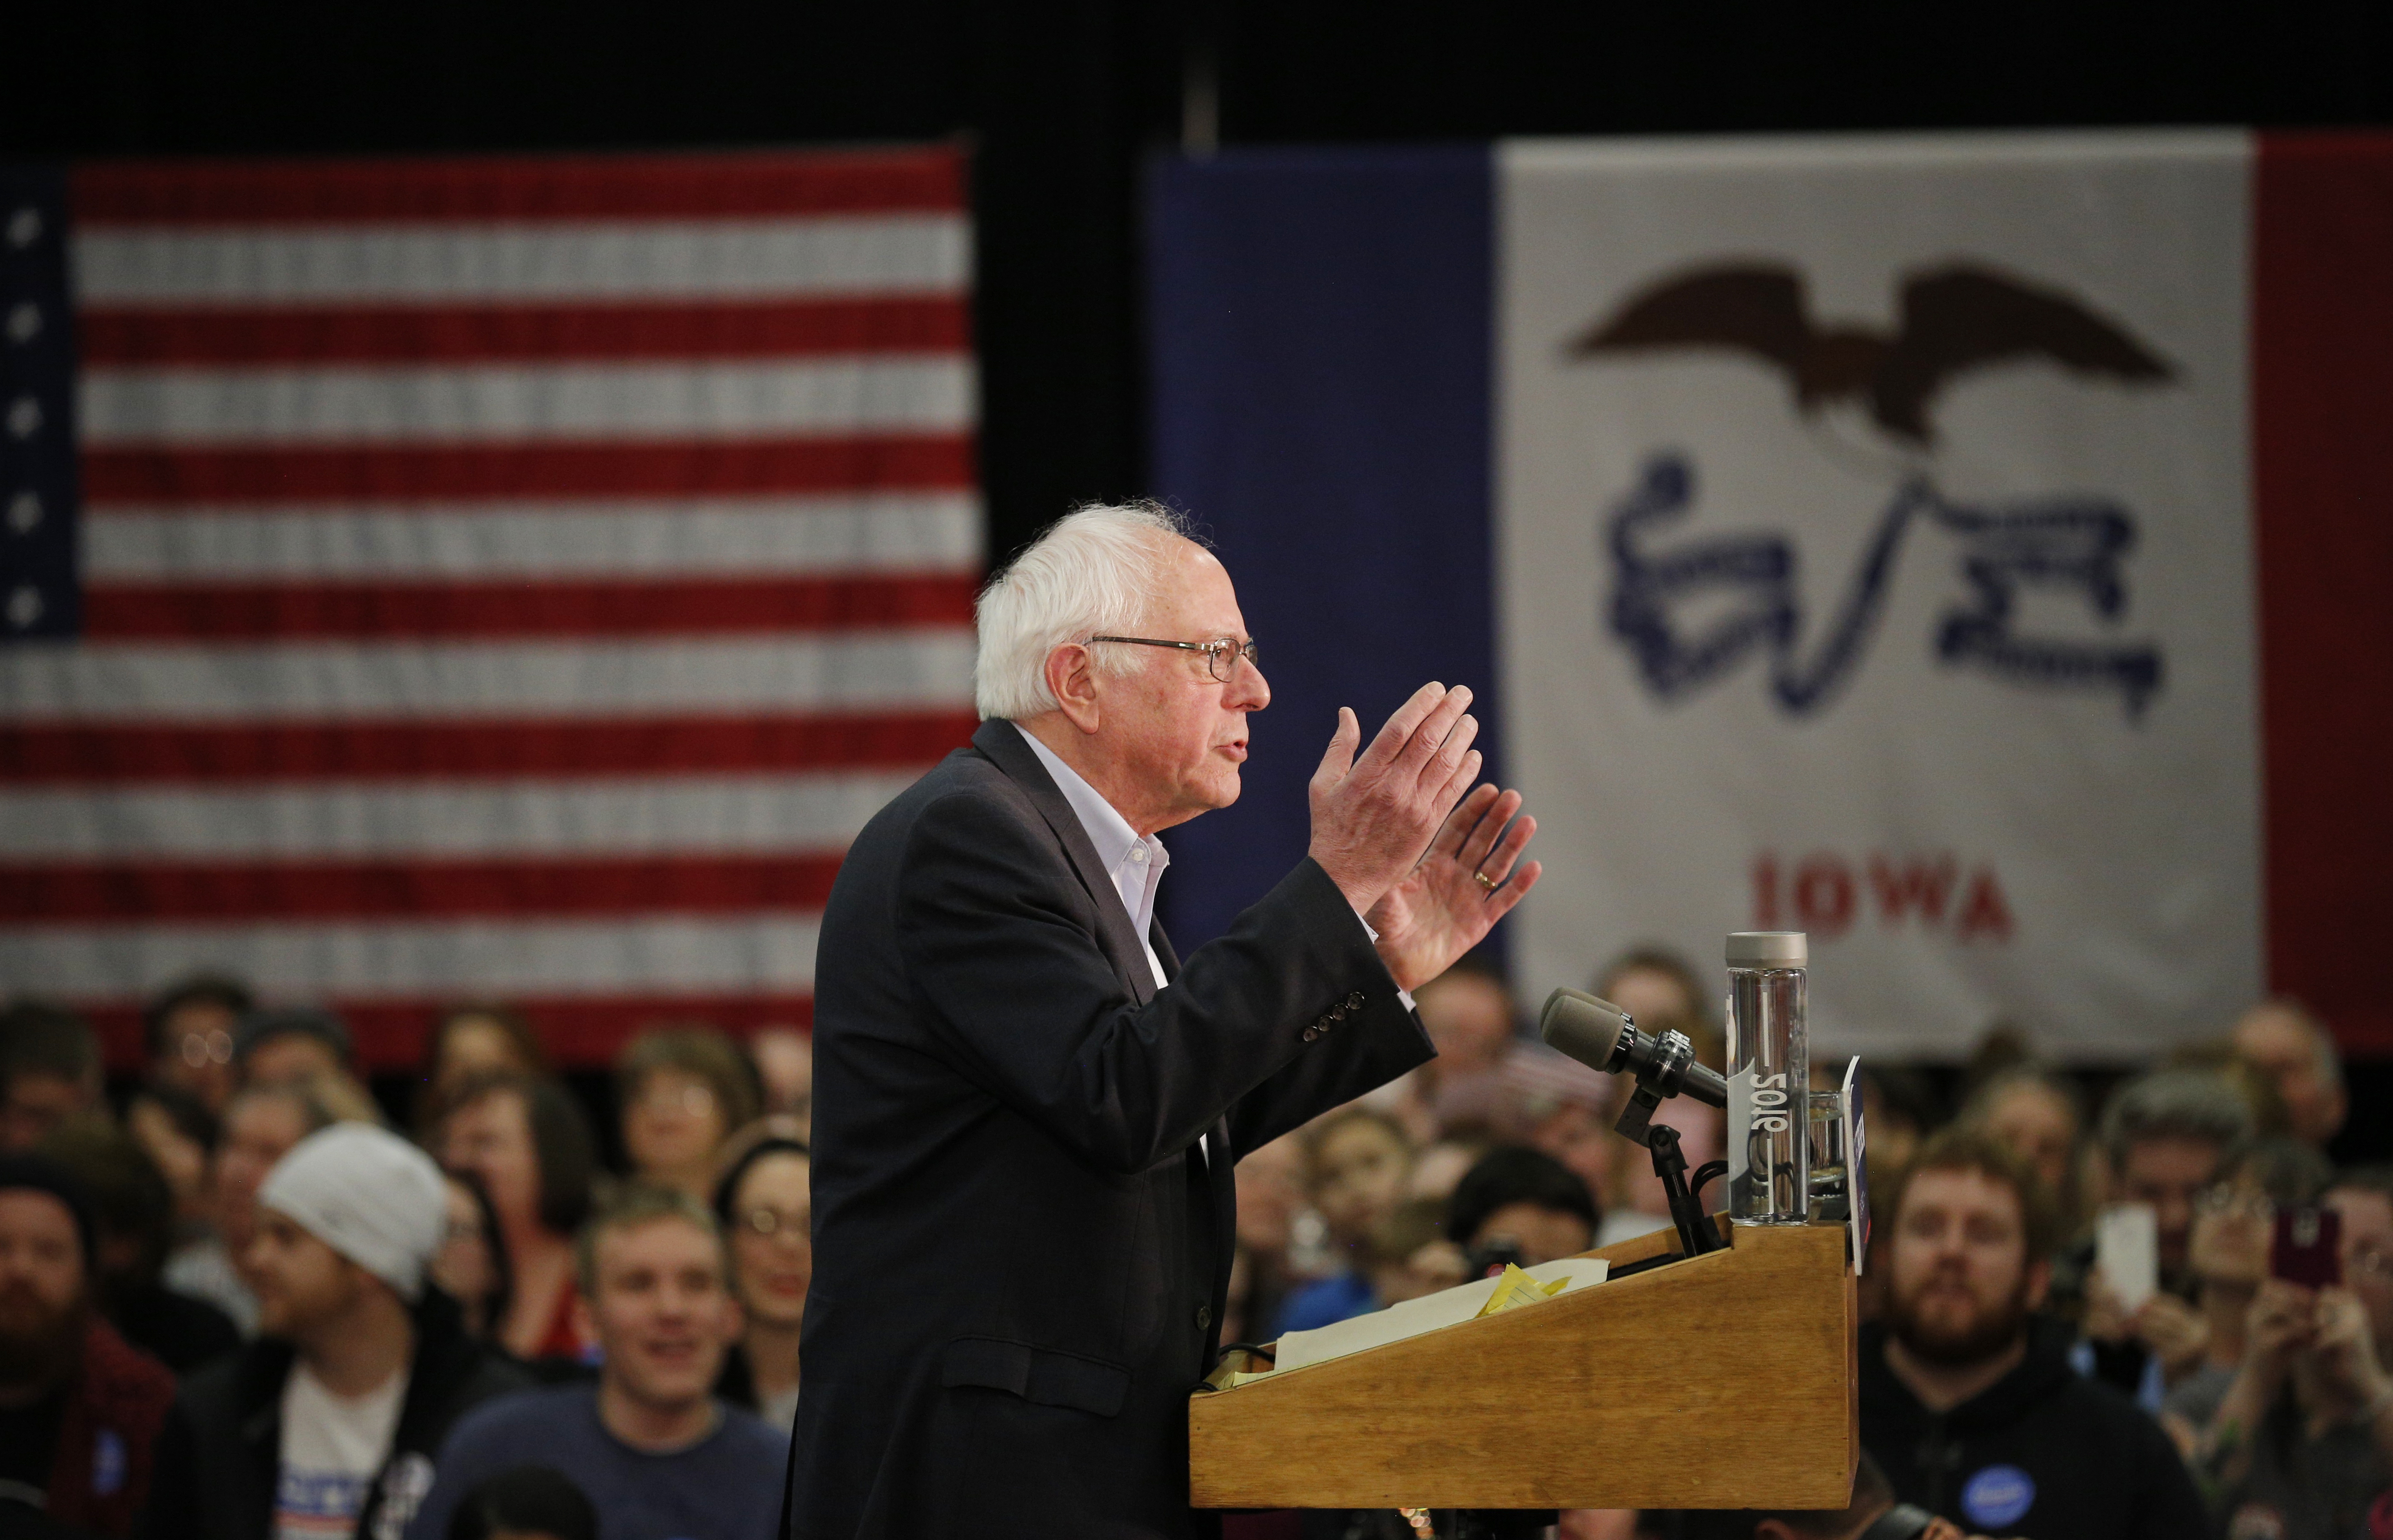 Bernie Sanders is infrequently questioned about his religious views.